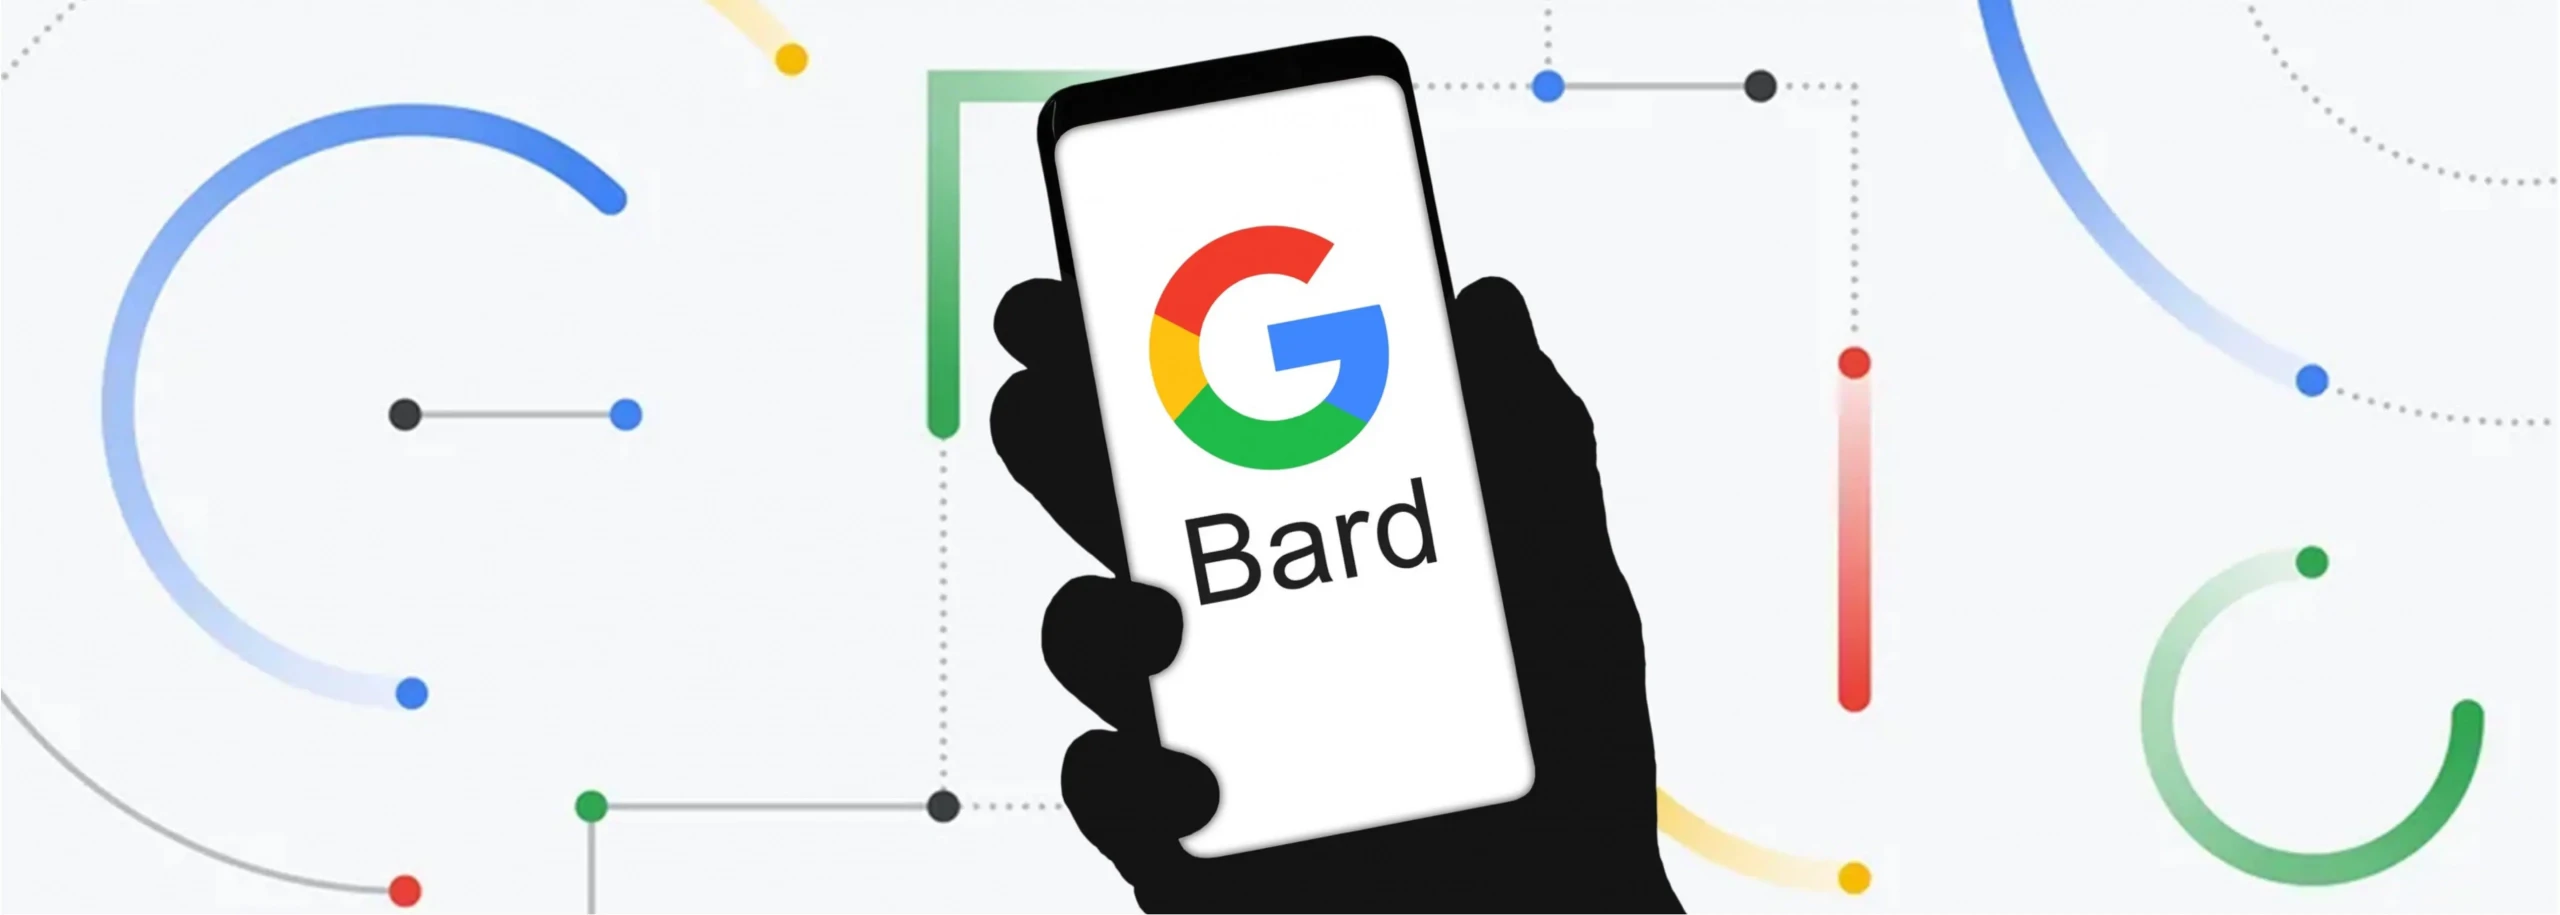 What is Google Bard? Google Bard launches in India; key details here